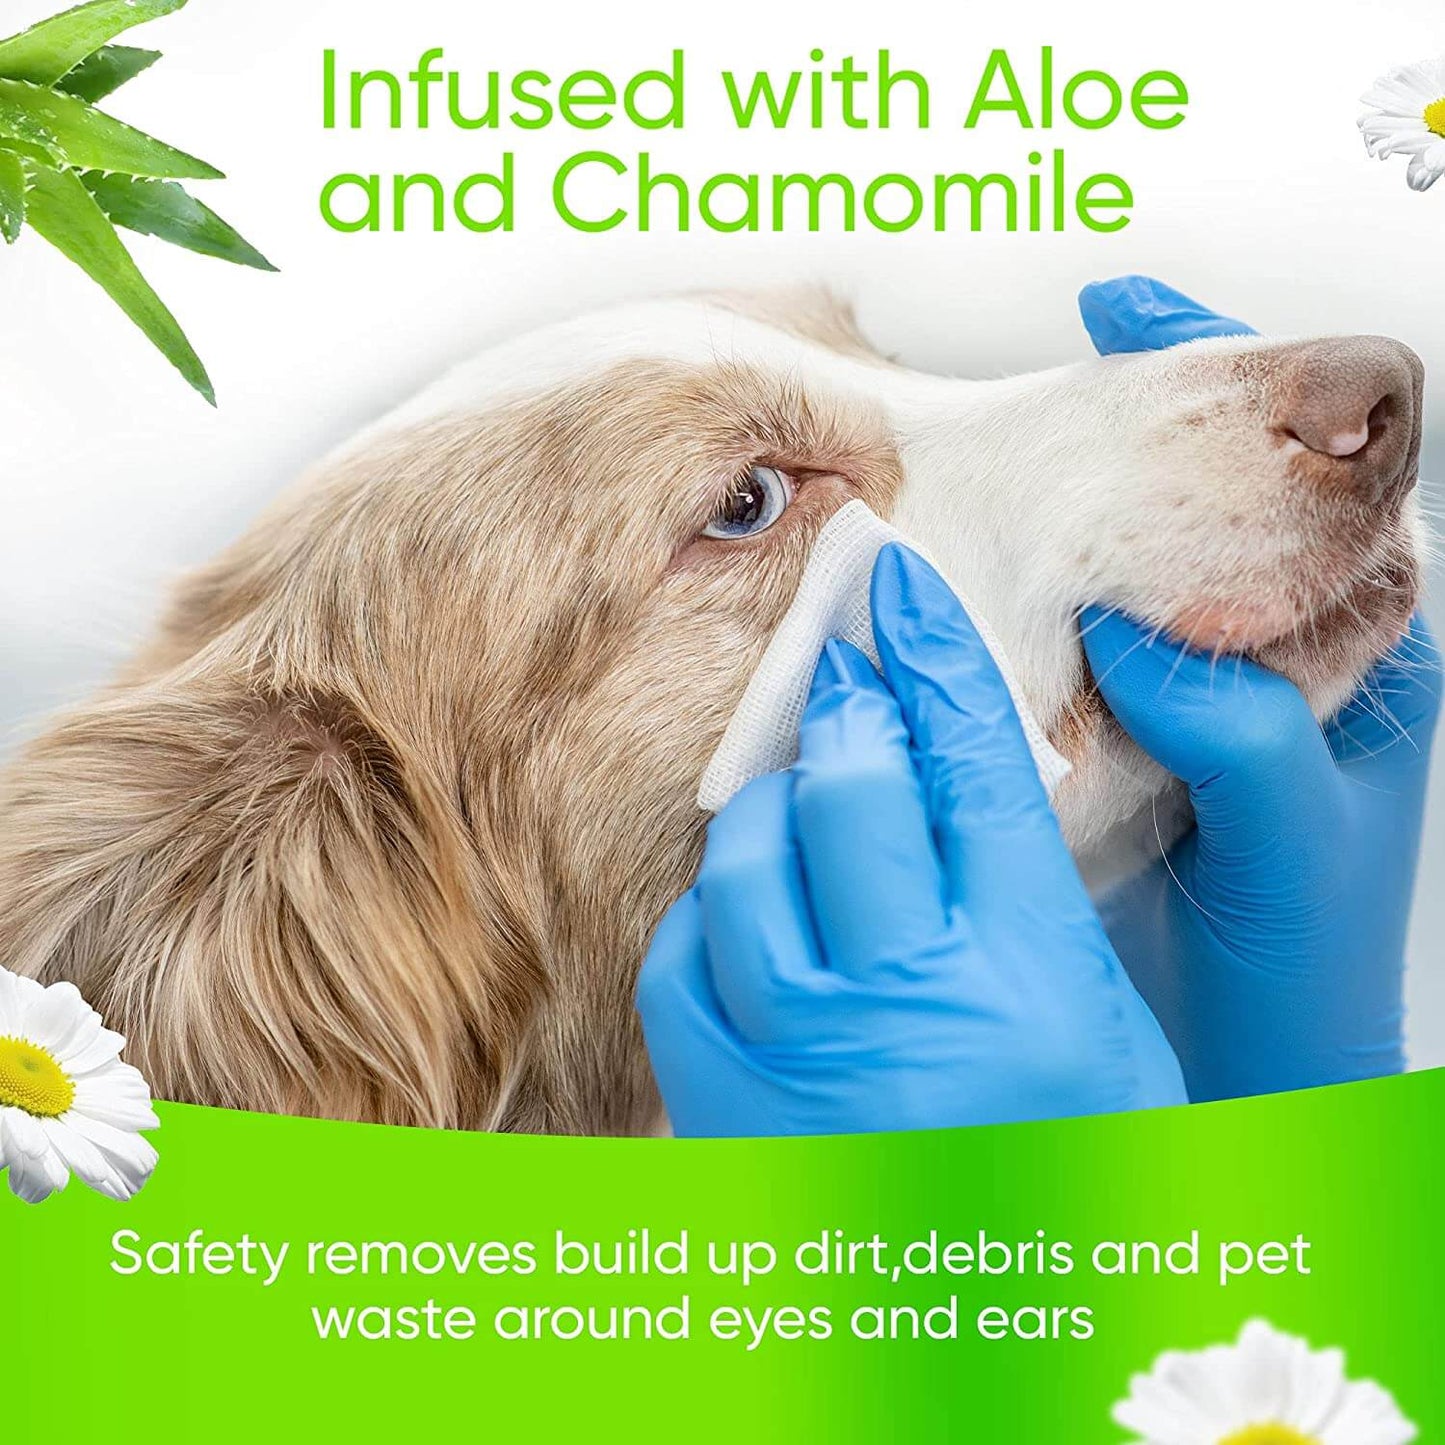 Pet Hygiene Grooming Wipes for Cats and Dogs Removes Eye Stains